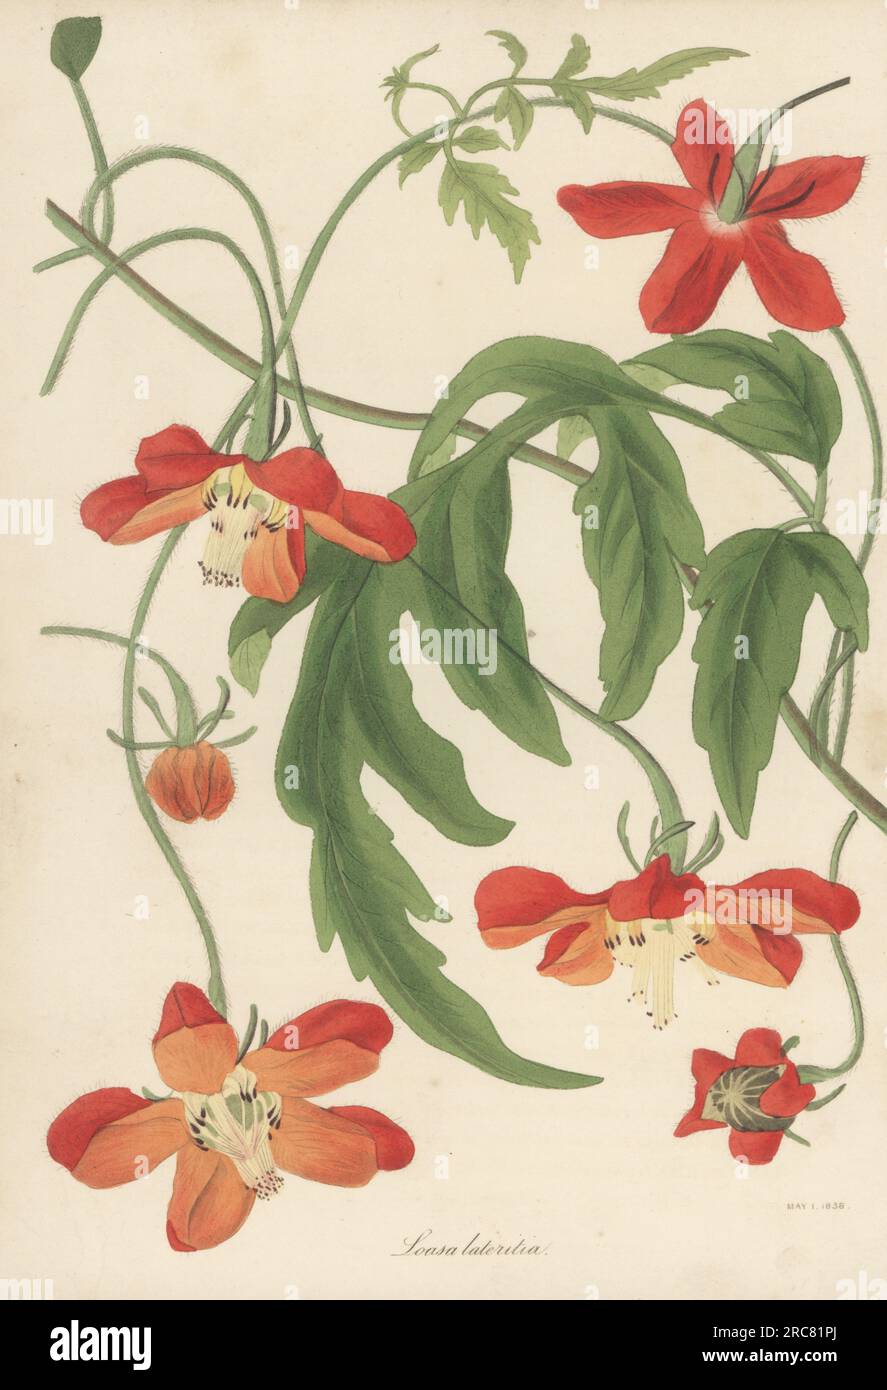 Chile nettle, Caiophora lateritia. Native to South America, raised in Glasgow Botanic Garden from seeds sent by Scottish botanist James Tweedie from Tucuman, Argentina. Red-flowered loasa, Loasa lateritia. Handcoloured lithograph from Joseph Paxton’s Magazine of Botany, and Register of Flowering Plants, Volume 5, Orr and Smith, London, 1838. Stock Photo